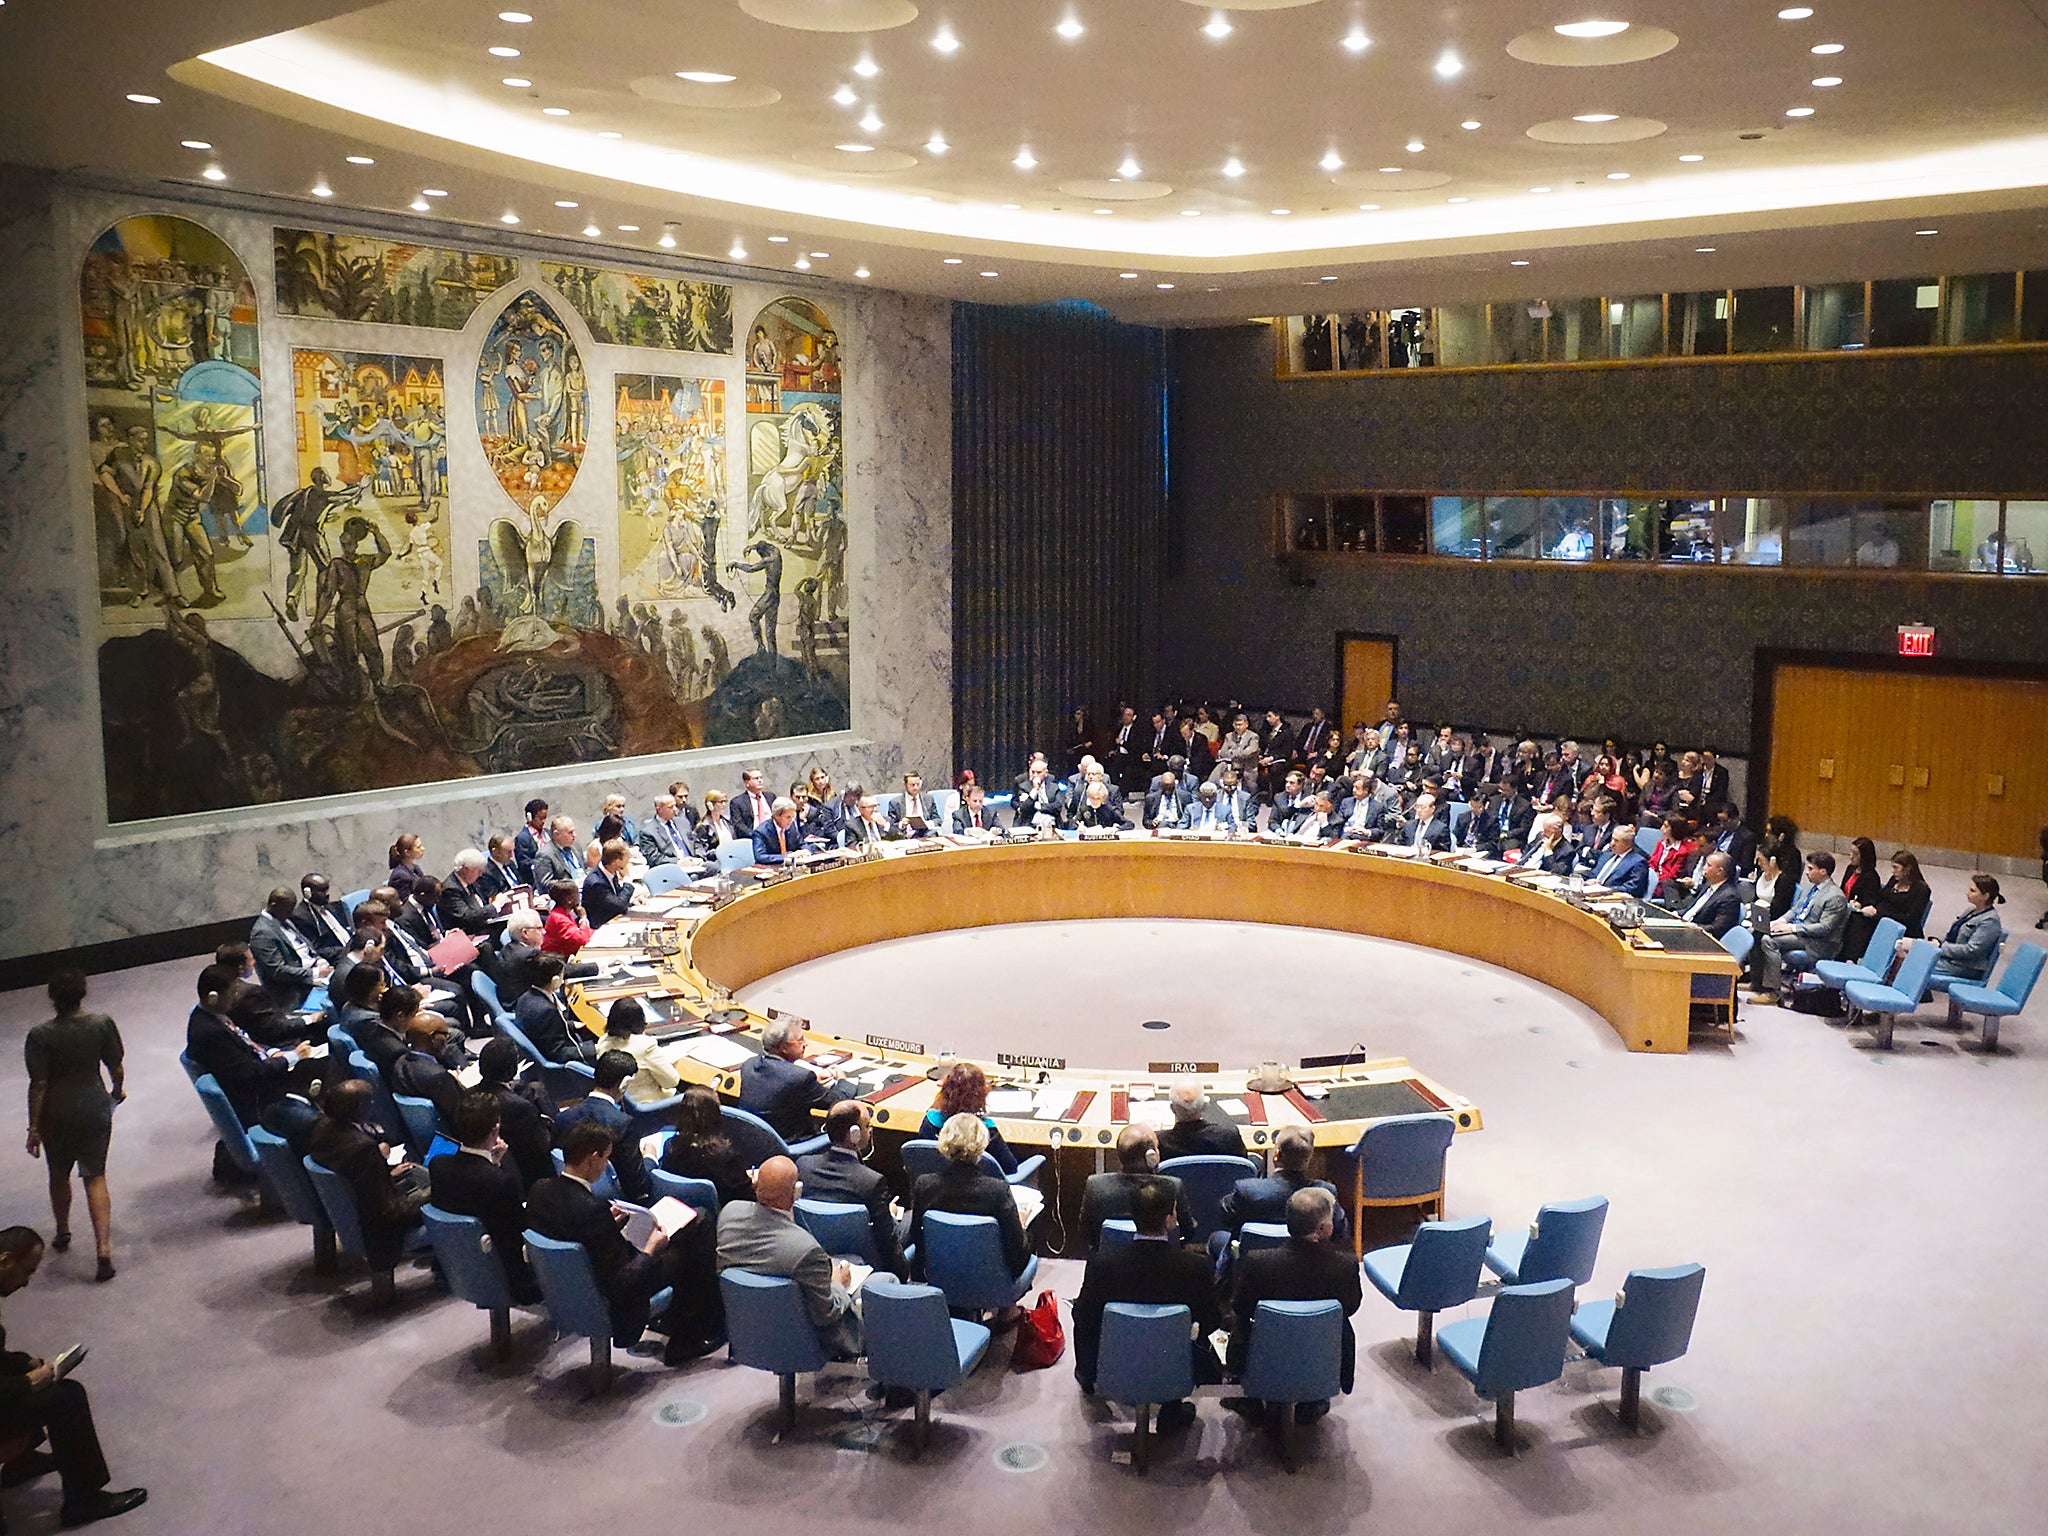 The United Nations Security Council gather together. North Korea may fall increasingly on their radar (Getty)